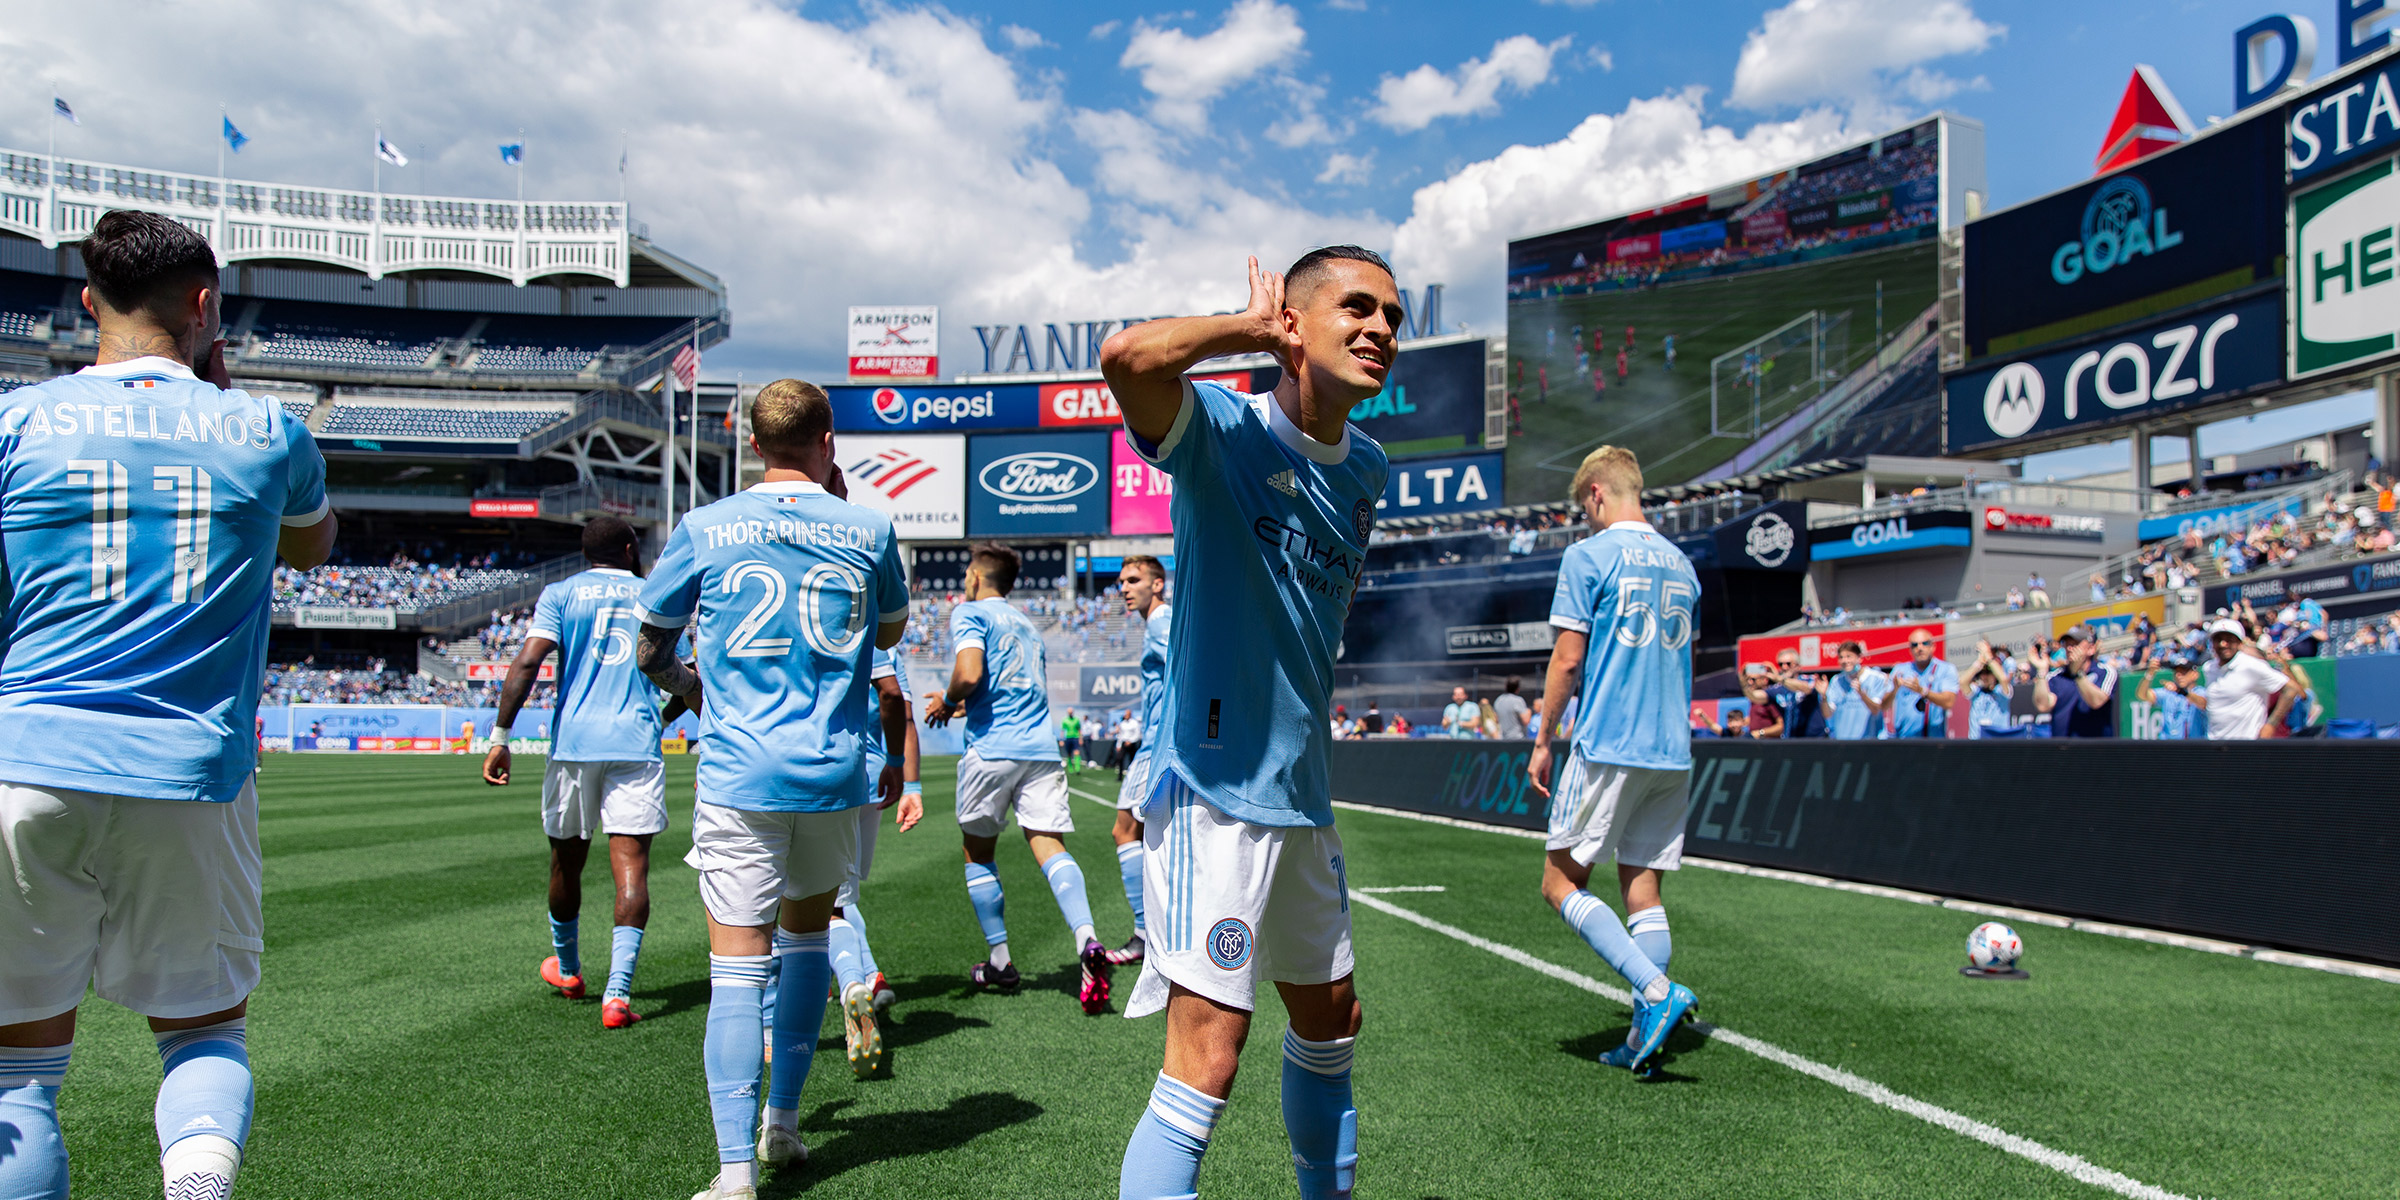 Nyc Boutique Hotel Offer Nycfc Partnership Affinia Hotels Suites